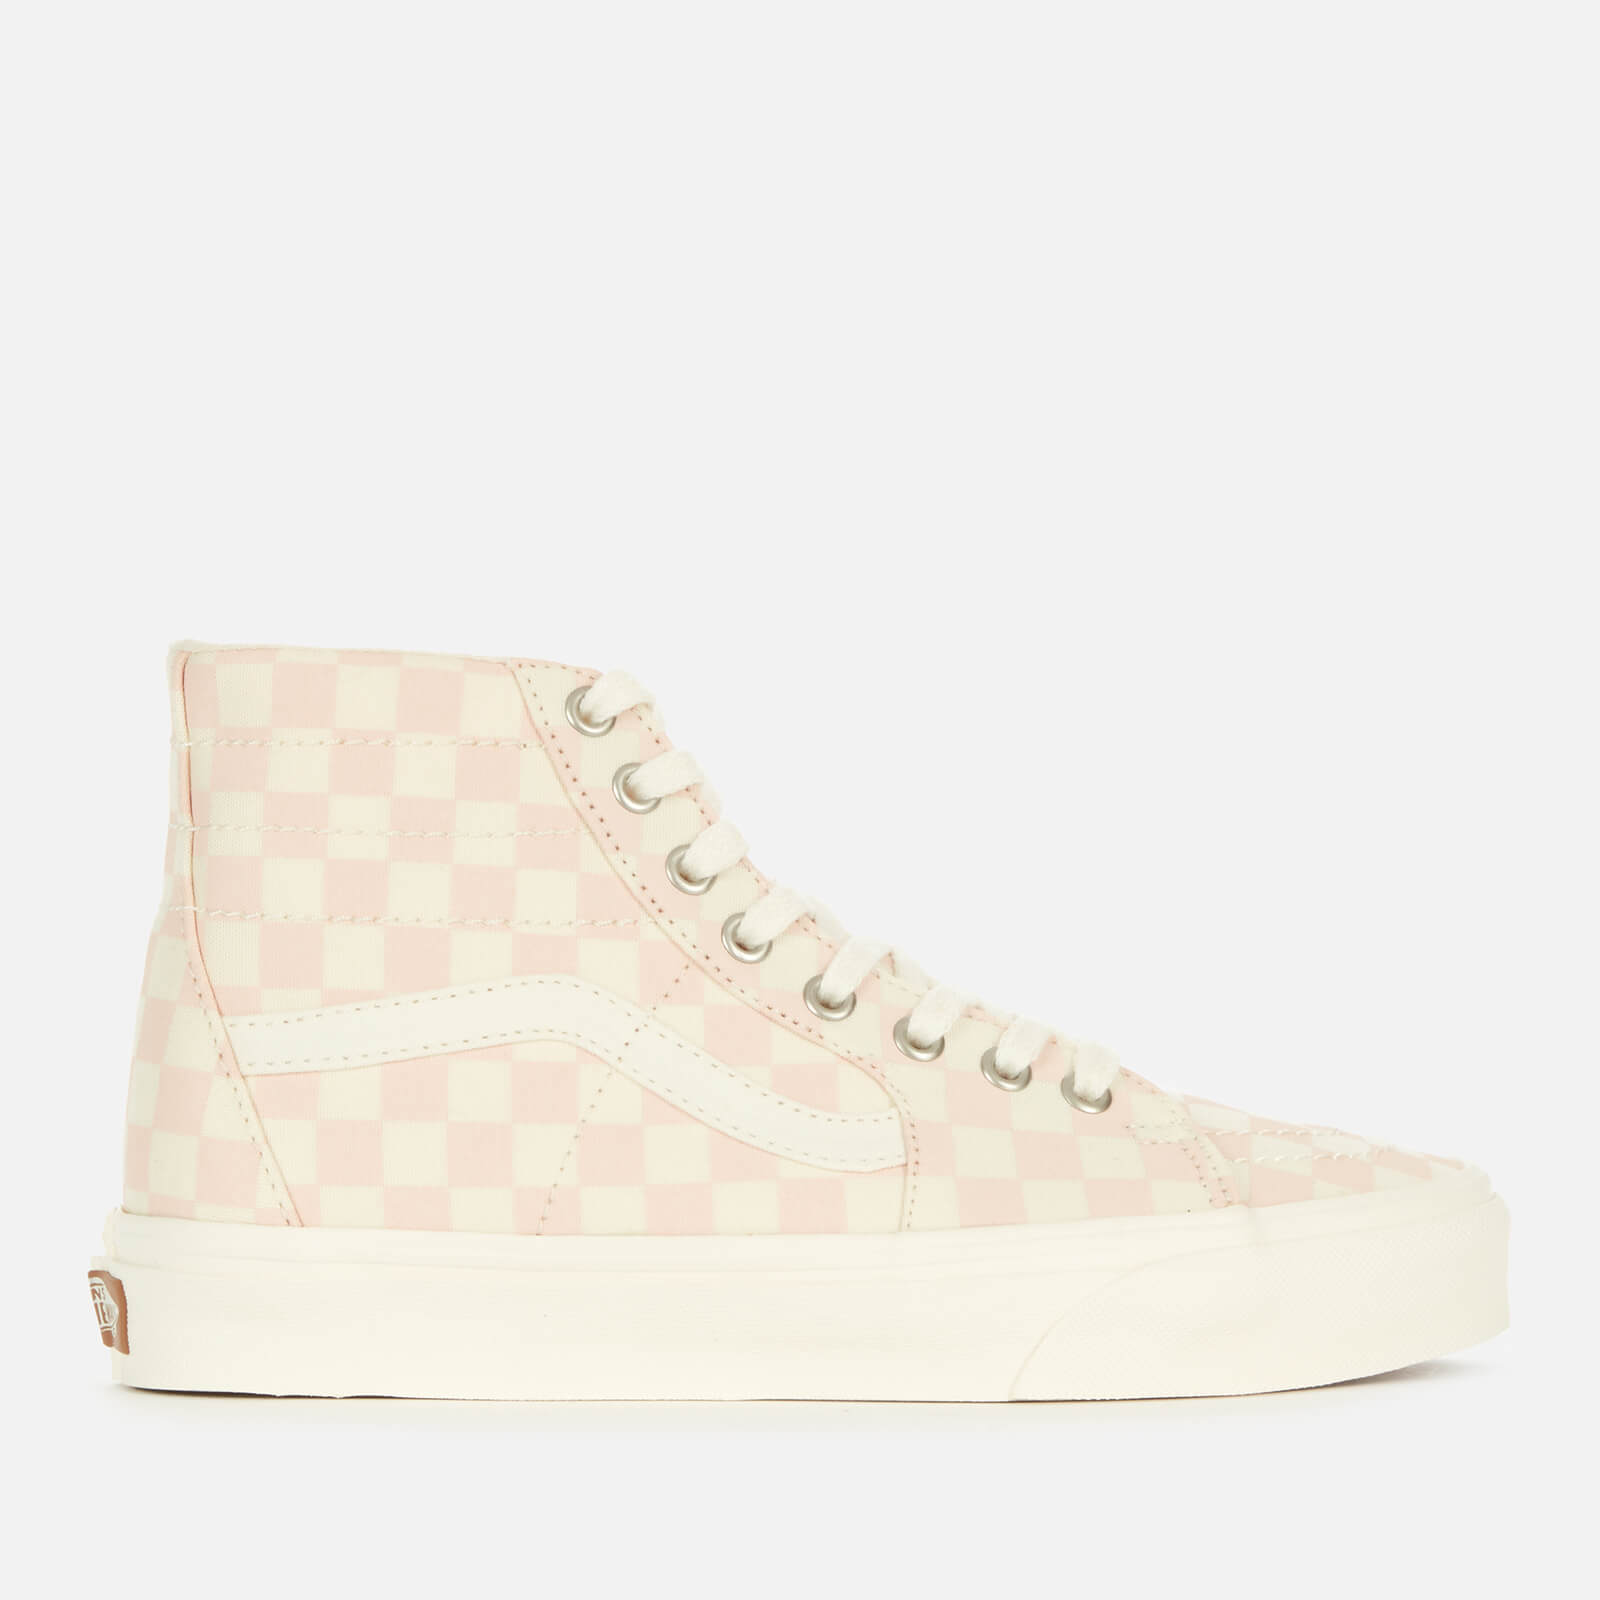 Vans Women's Eco-Theory Tapered Sk8 Hi-Top Trainers - Peachy Keen/Natural - UK 6